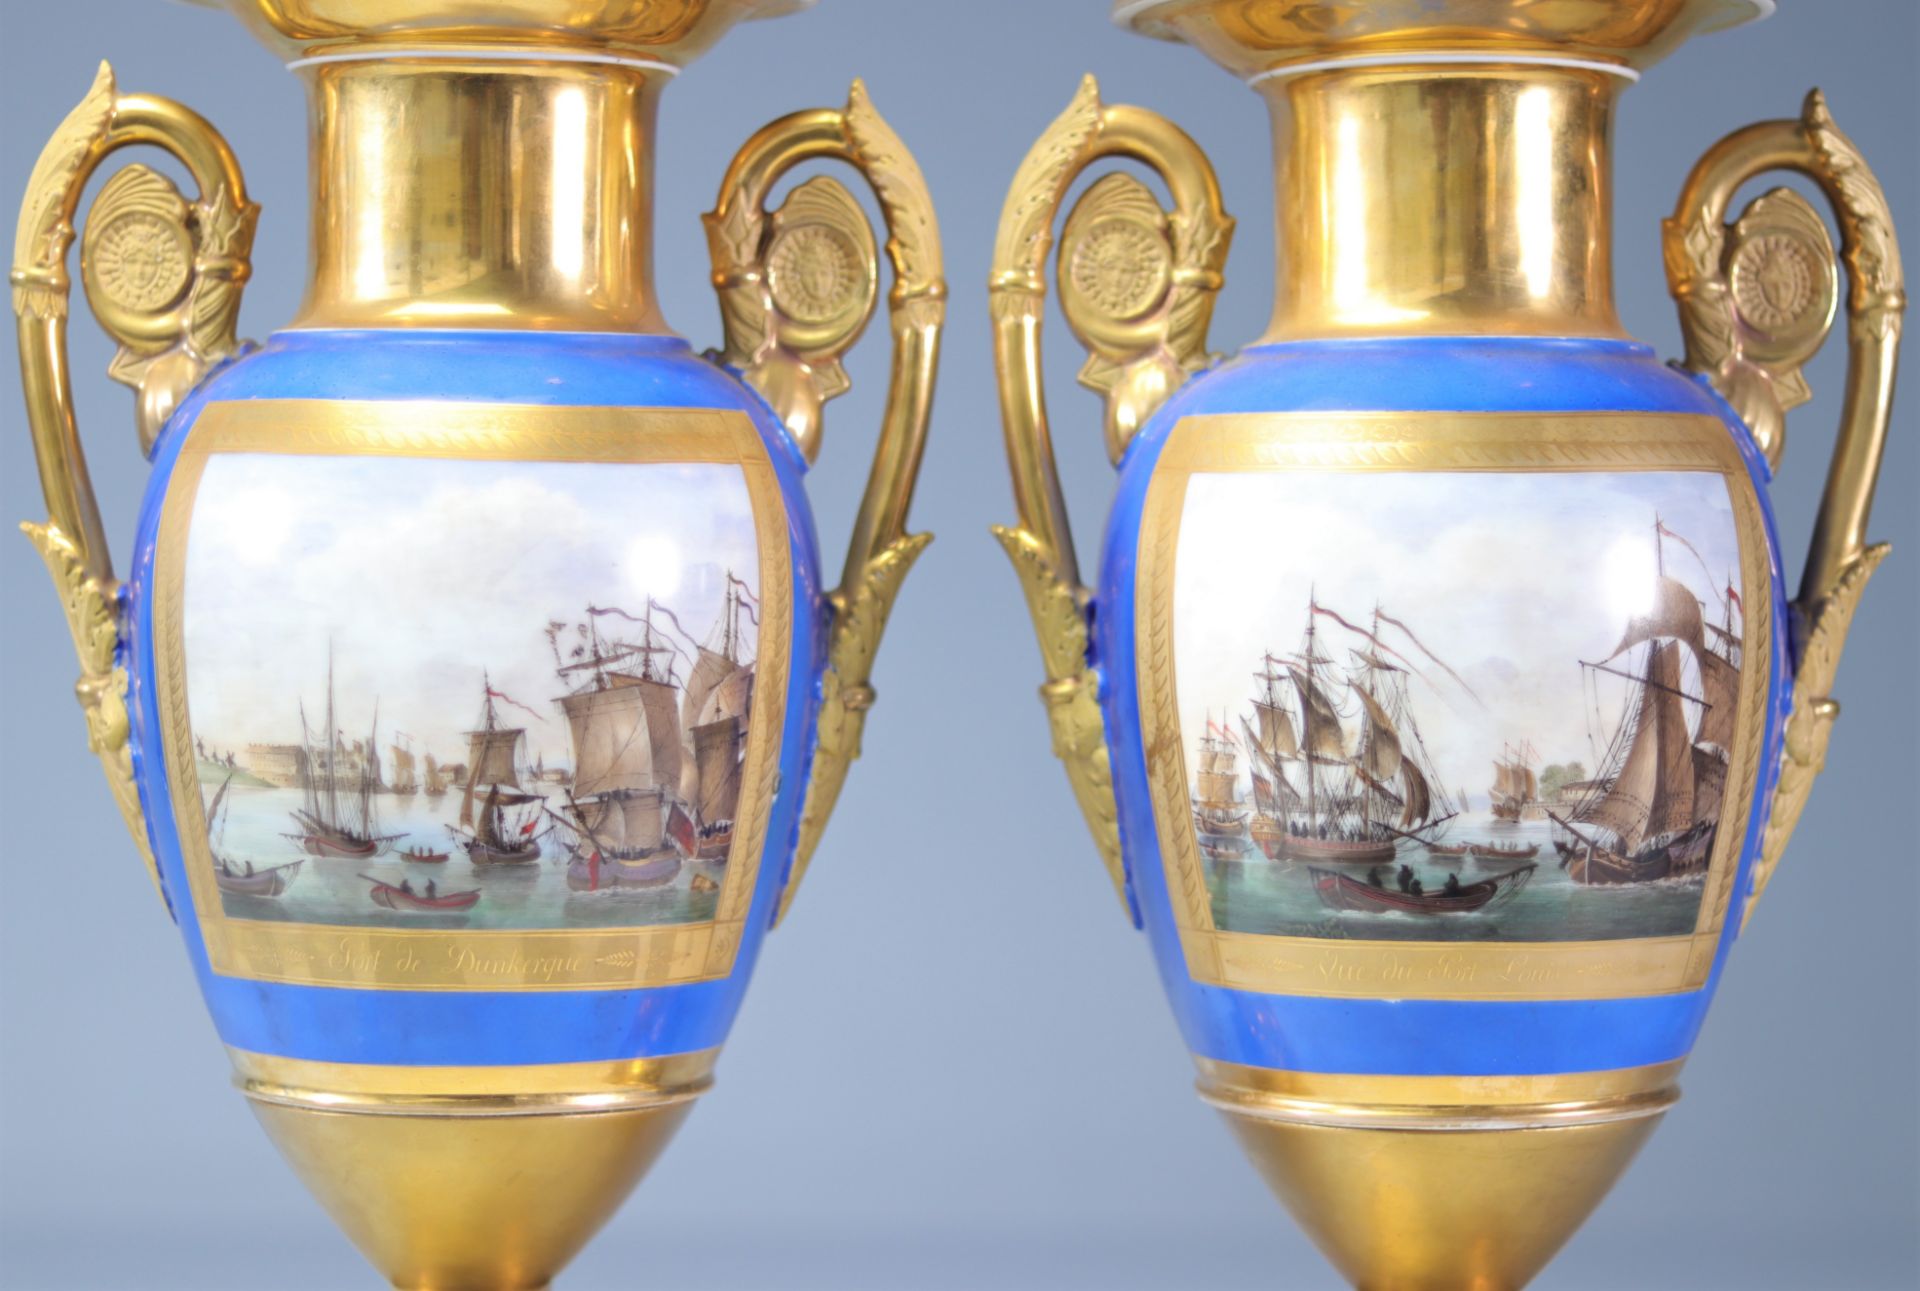 Pair of Empire period vases with port scenes "Port Louis and Dunkirk" - Image 3 of 5